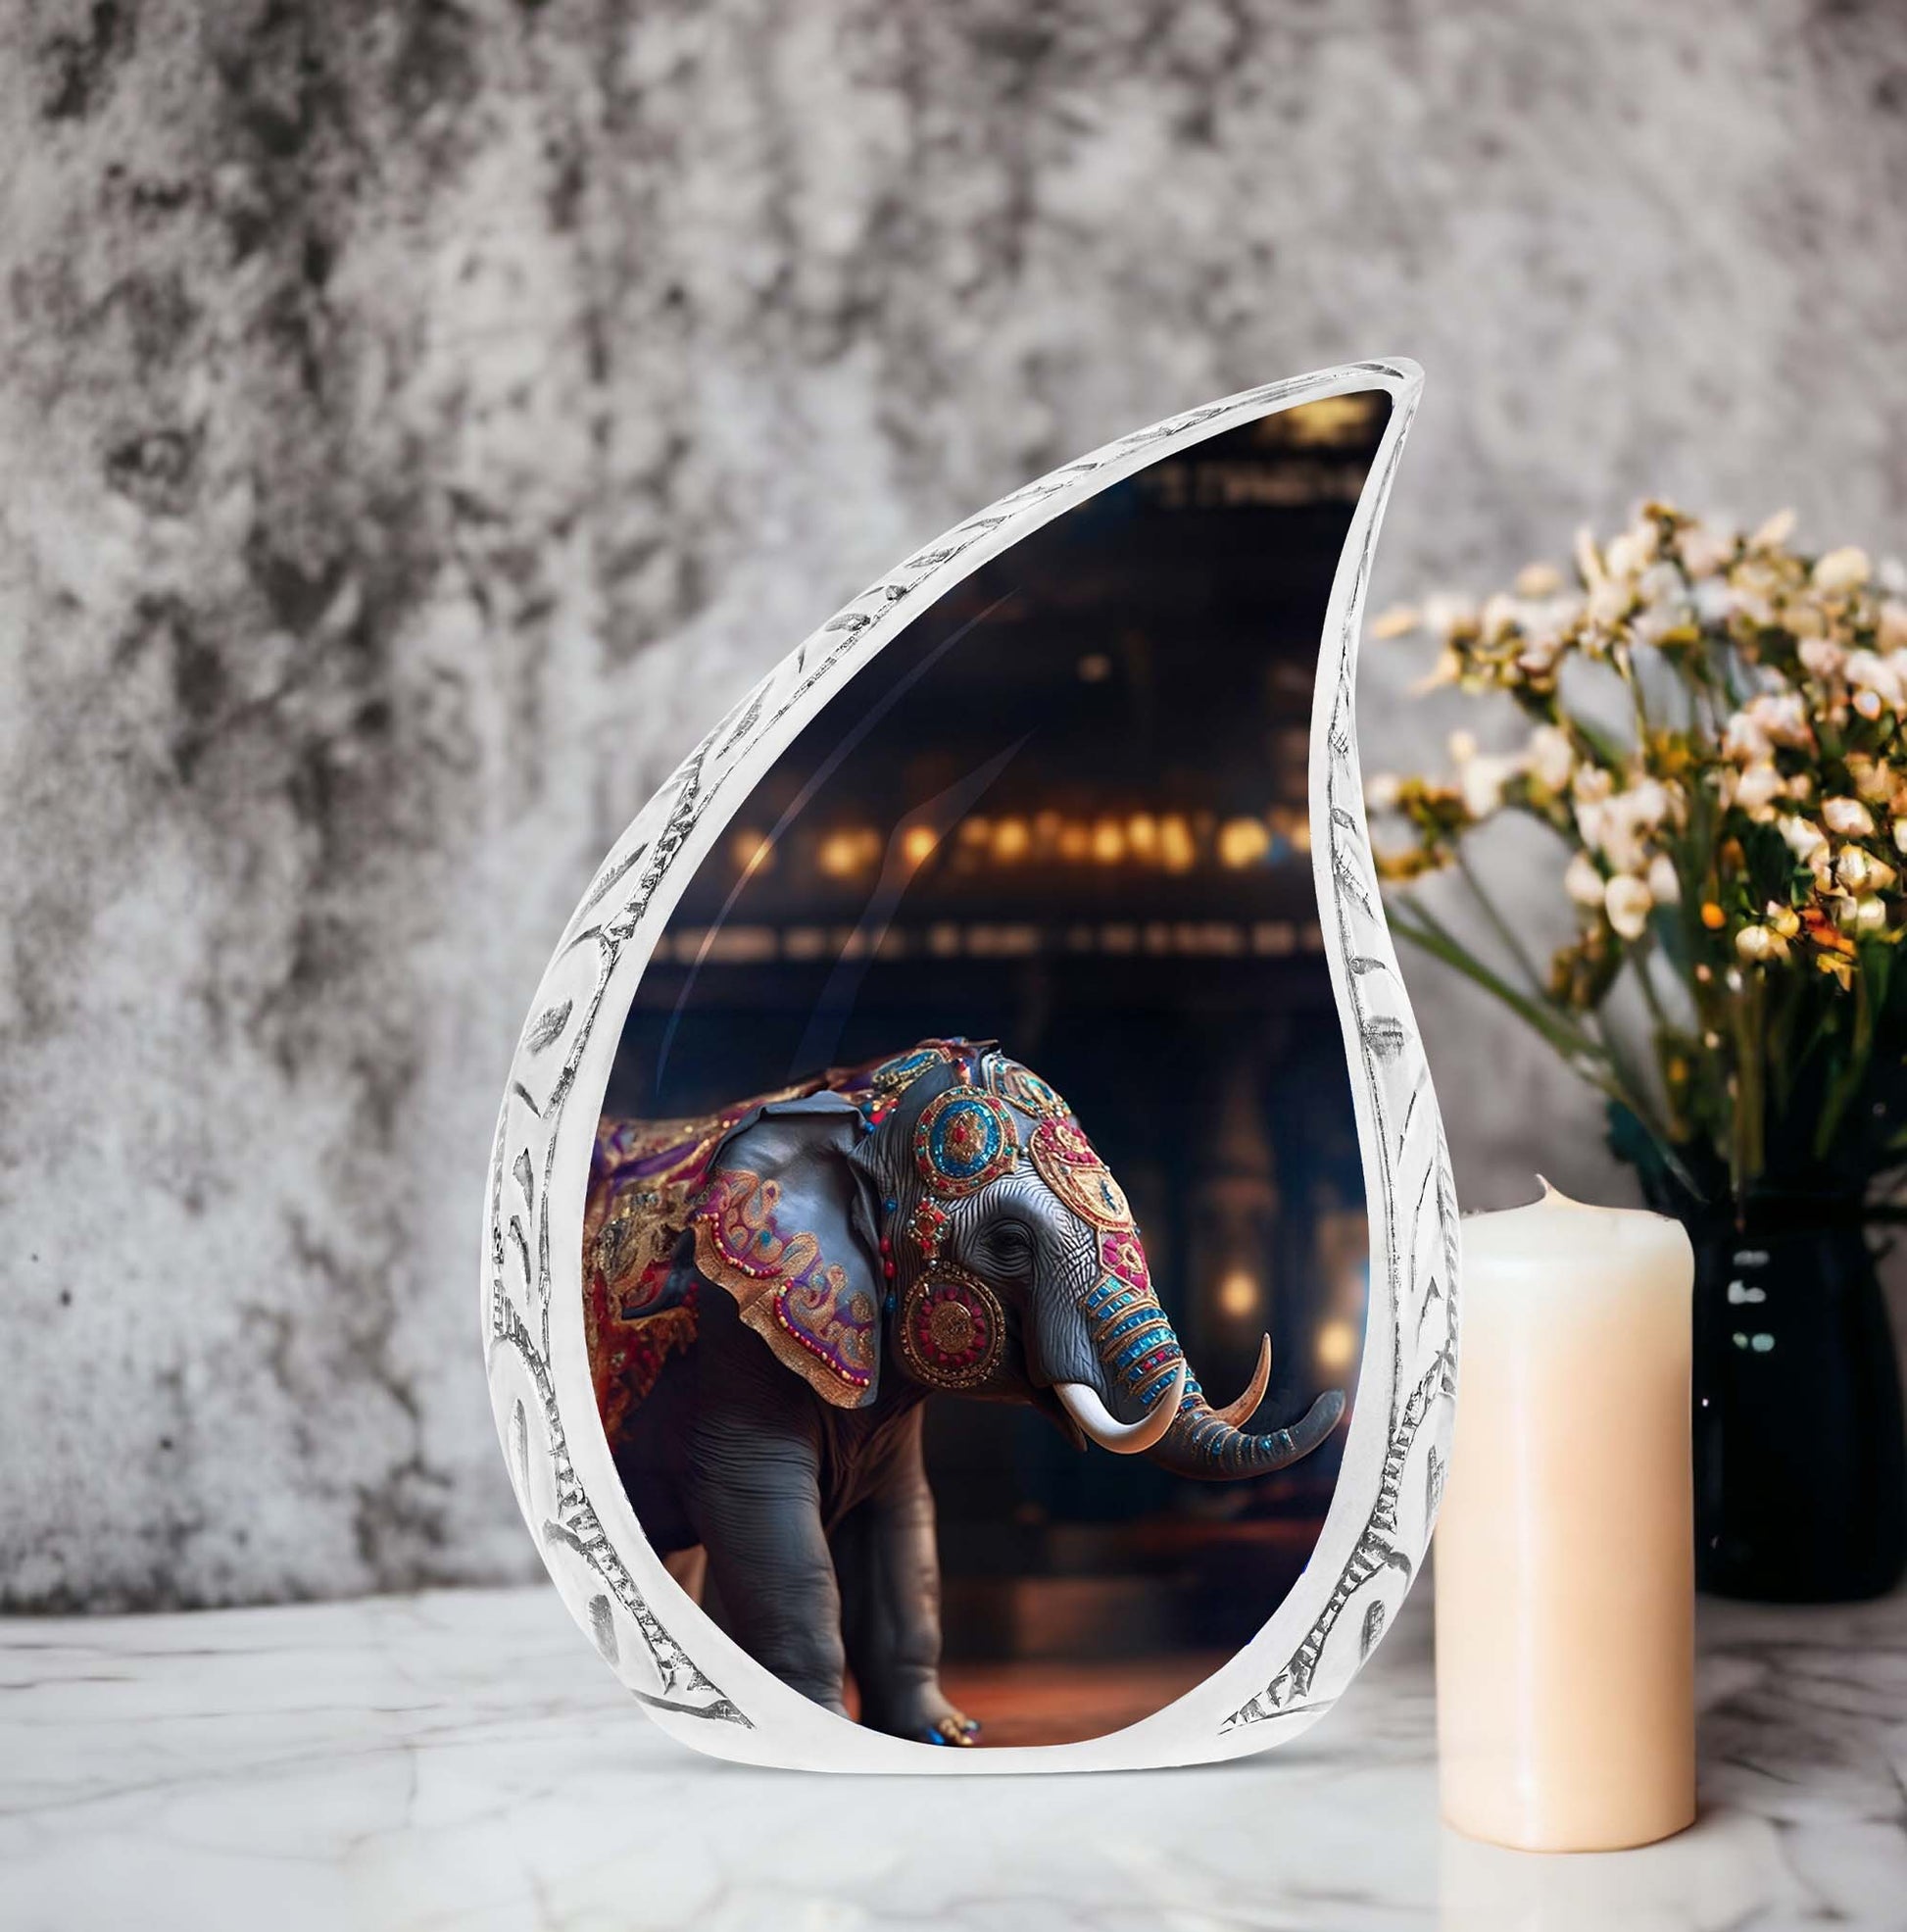 Large cremation urn for ashes featuring an intricate elephant design, ideal for adult male funeral use